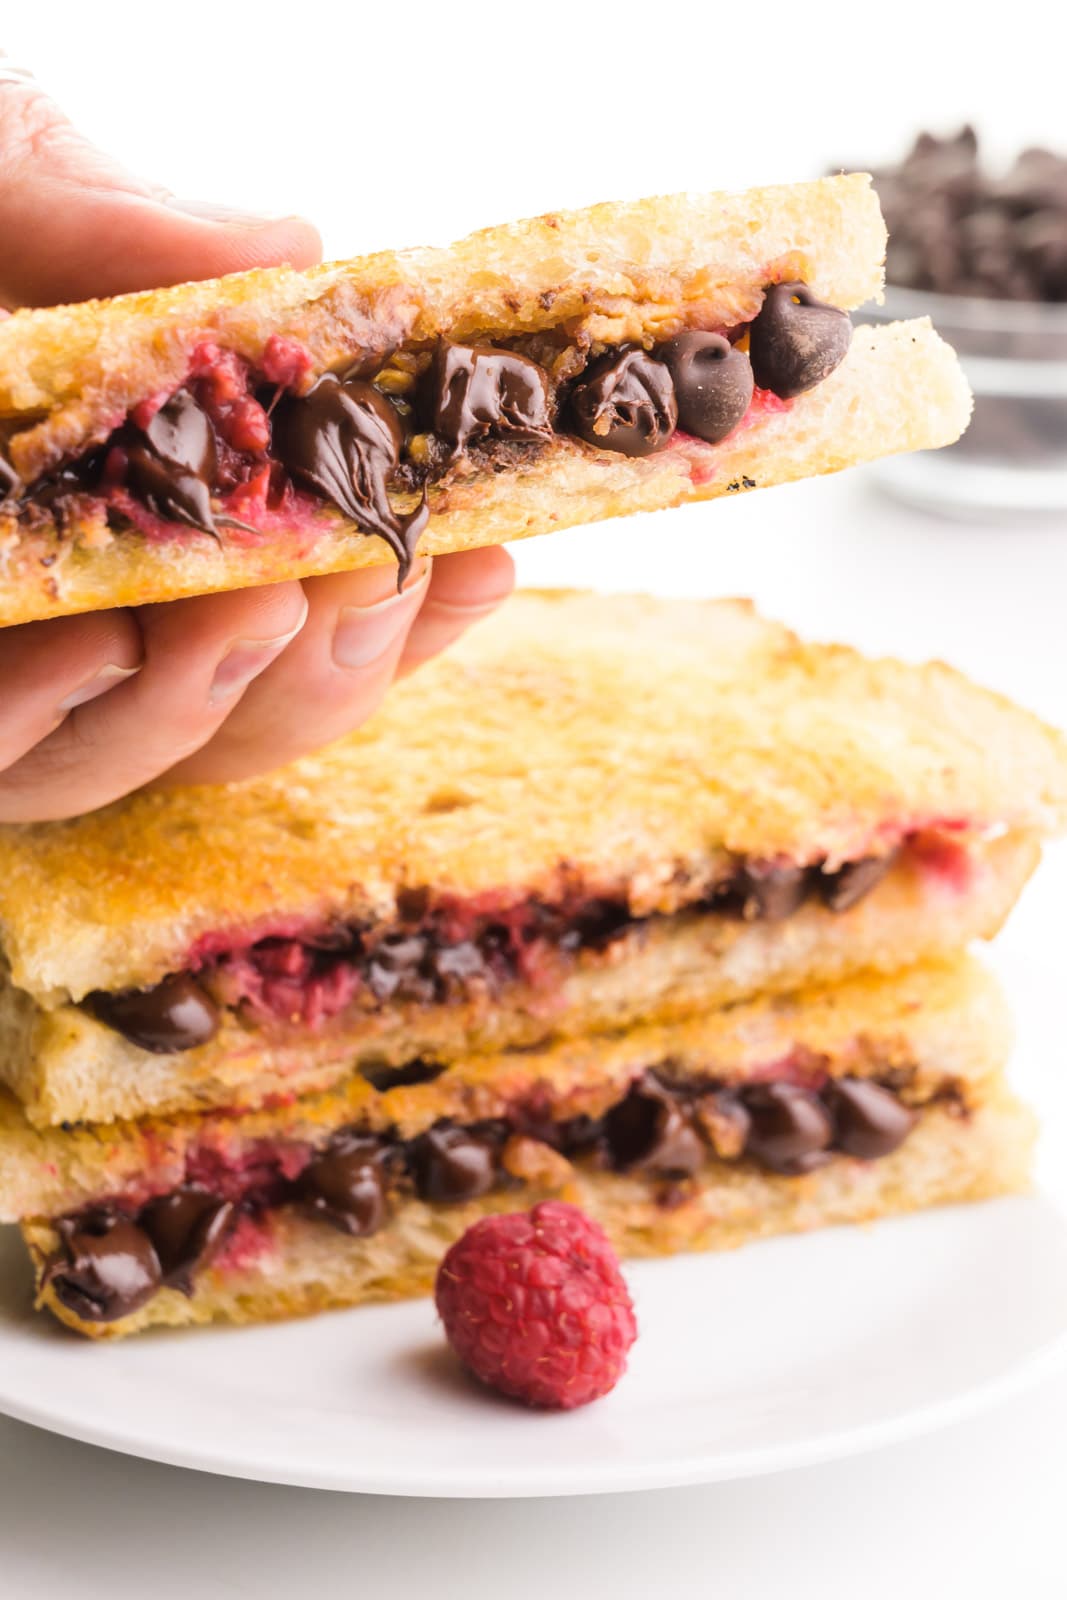 A hand holds a grilled chocolate sandwich hovering over a sack of two more of the sandwiches on a plate. There is a fresh raspberry on the plate and a bowl of chocolate chips in the background.